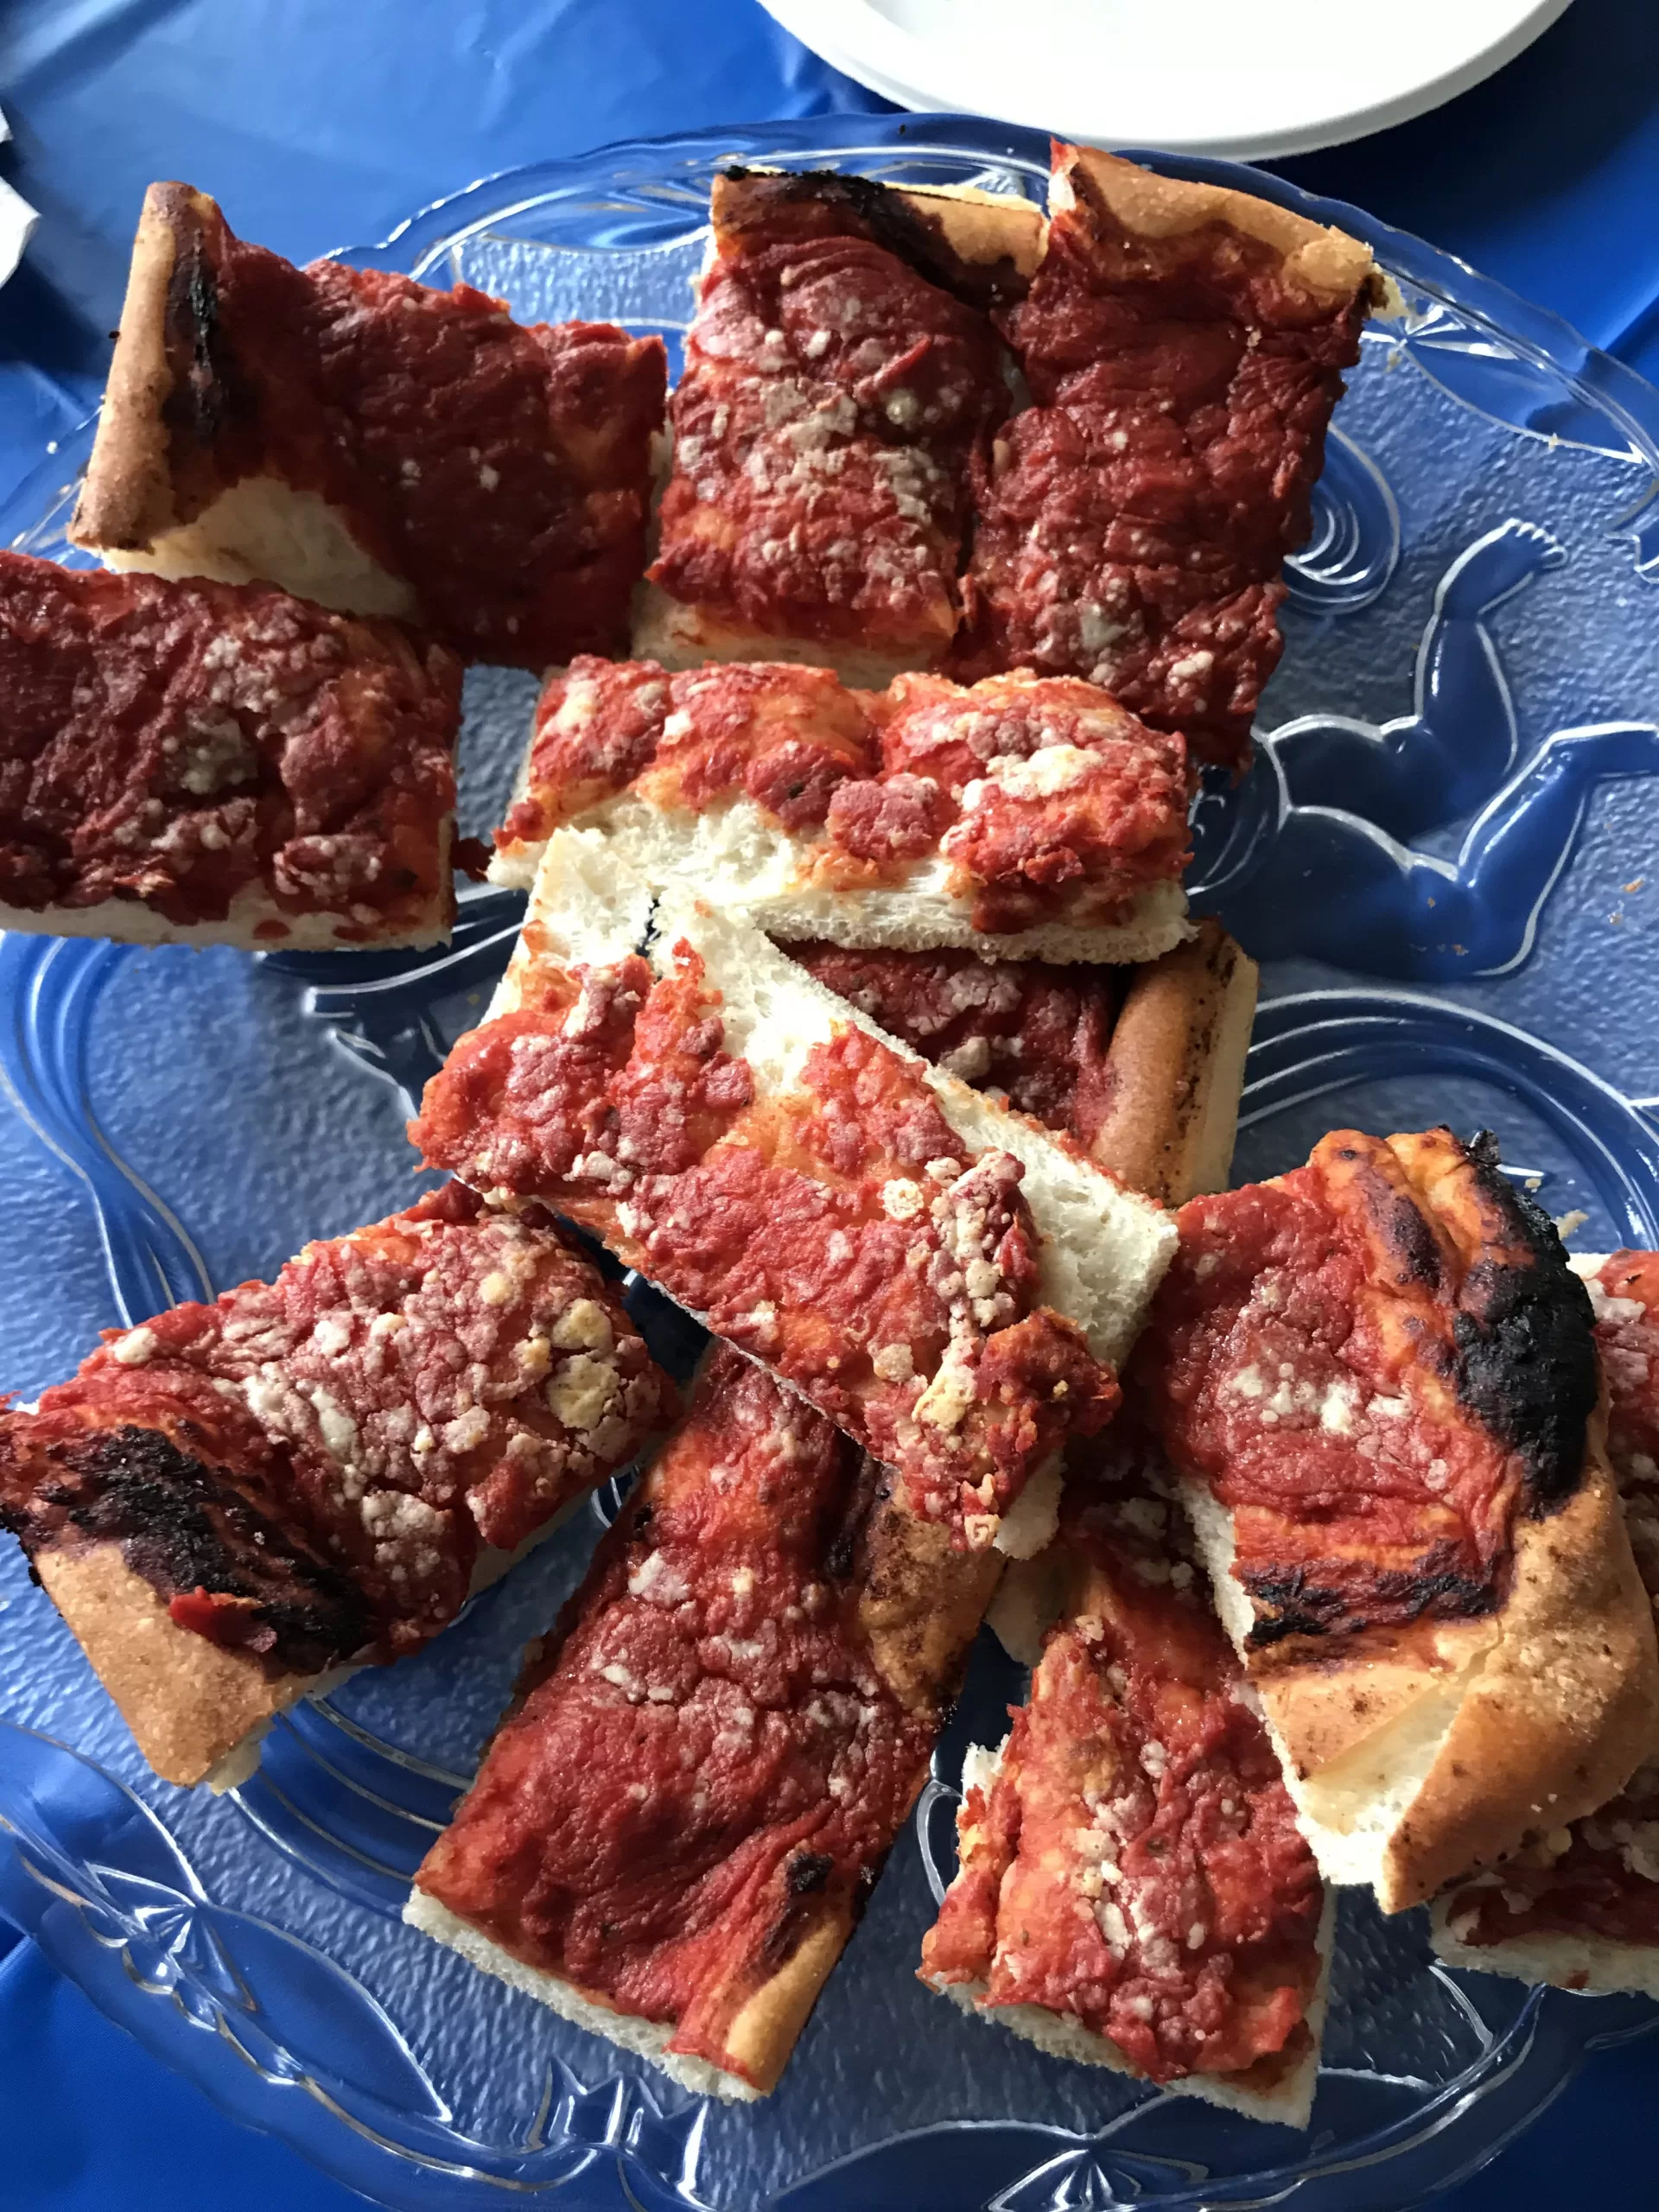 A table with a blue table cloth with a plate containing several pieces of Rhode Island-style bakery pizza.